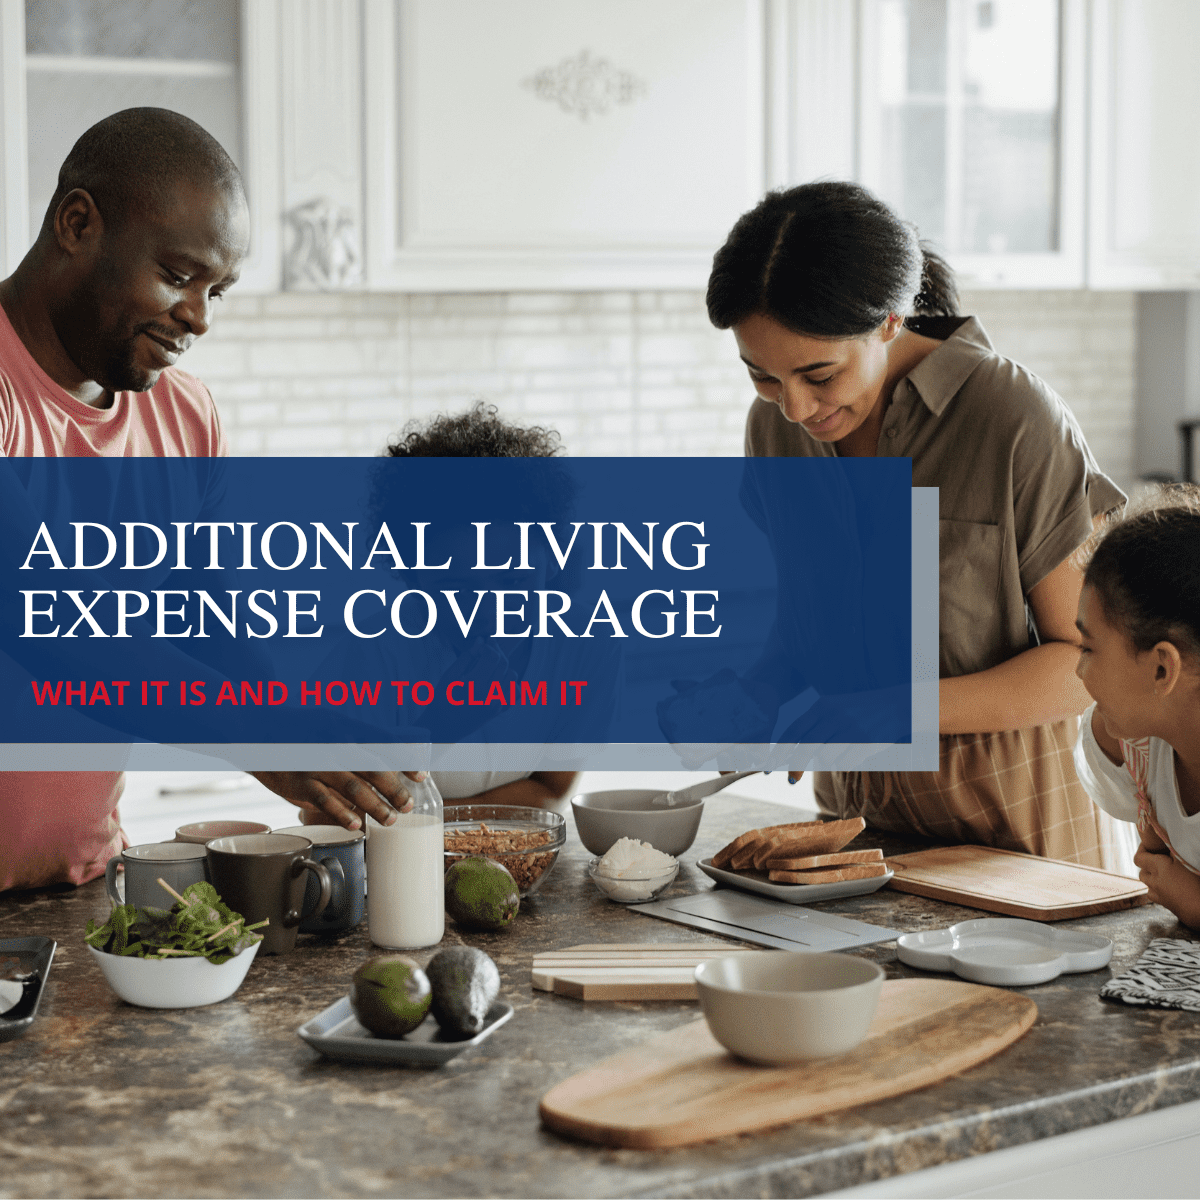 Additional Living Expense Coverage: What It Is and How to Claim It